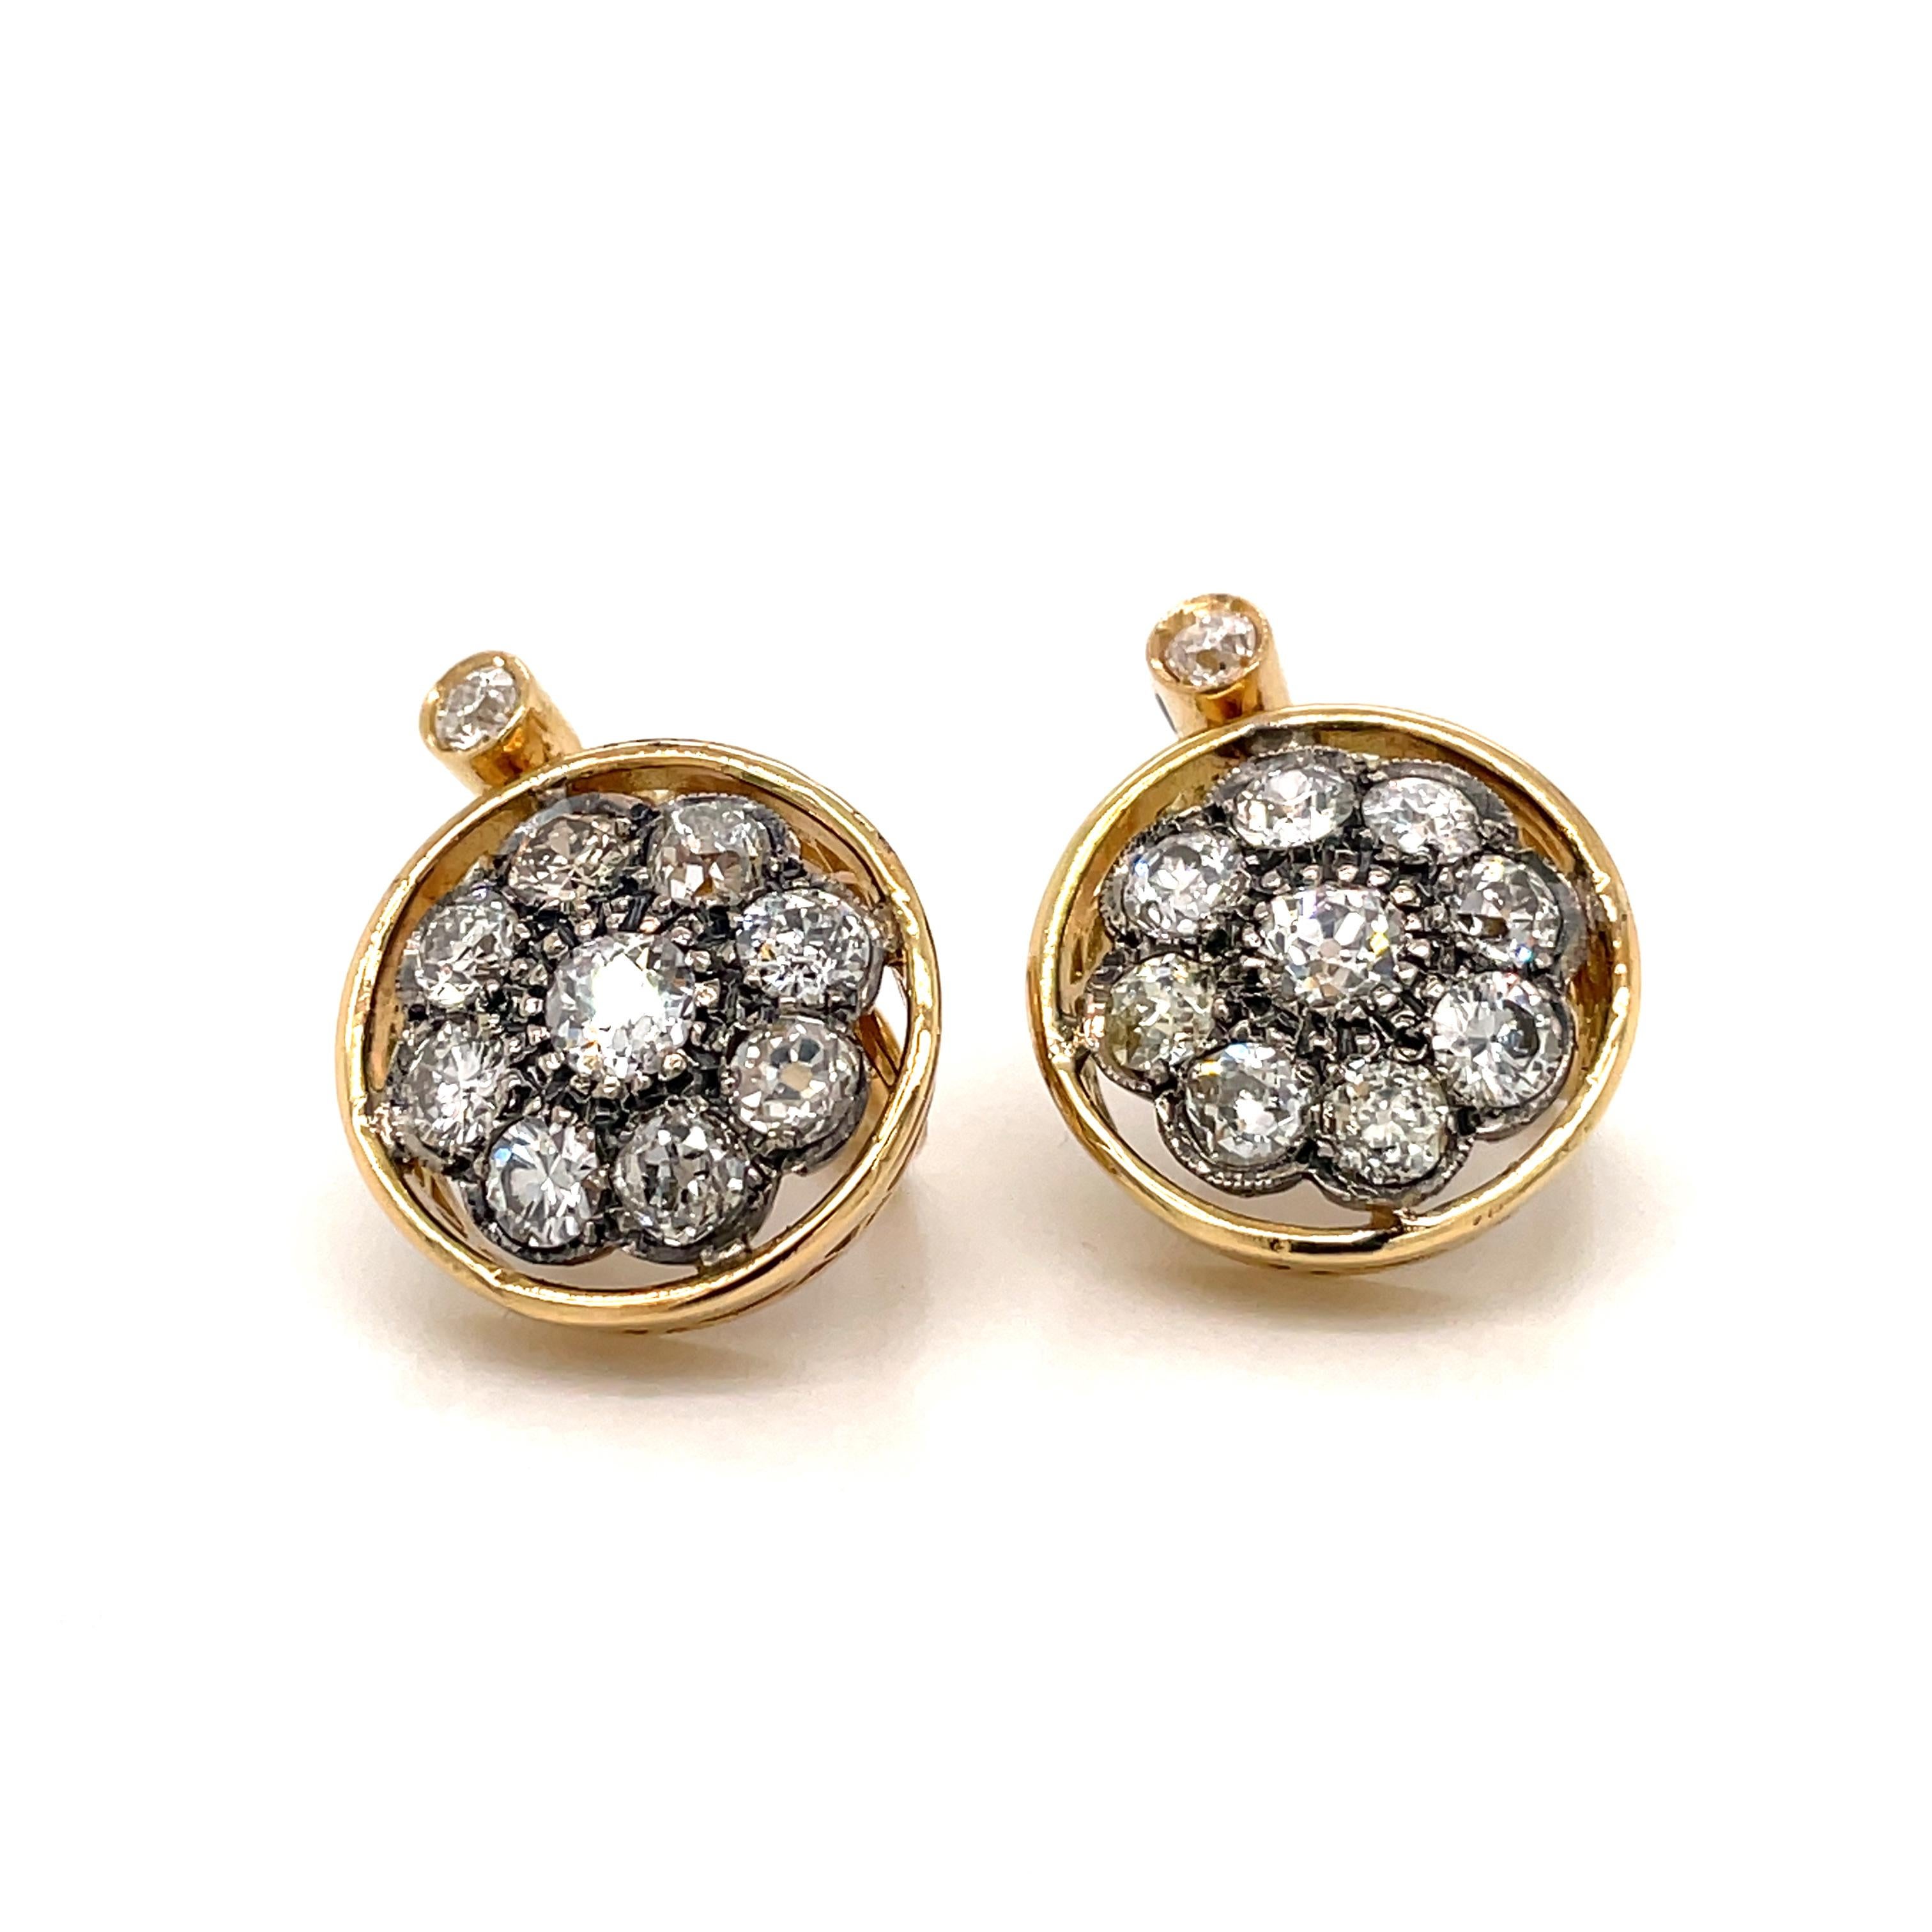 Stunning unusual antique cluster earrings, in excellent conditions.
They are hand crafted in 18k yellow gold and silver, set with 3.40 carats of Sparkling and Large Old mine cut Diamonds, graded H/I/J color Vs clarity. The two main diamonds in the